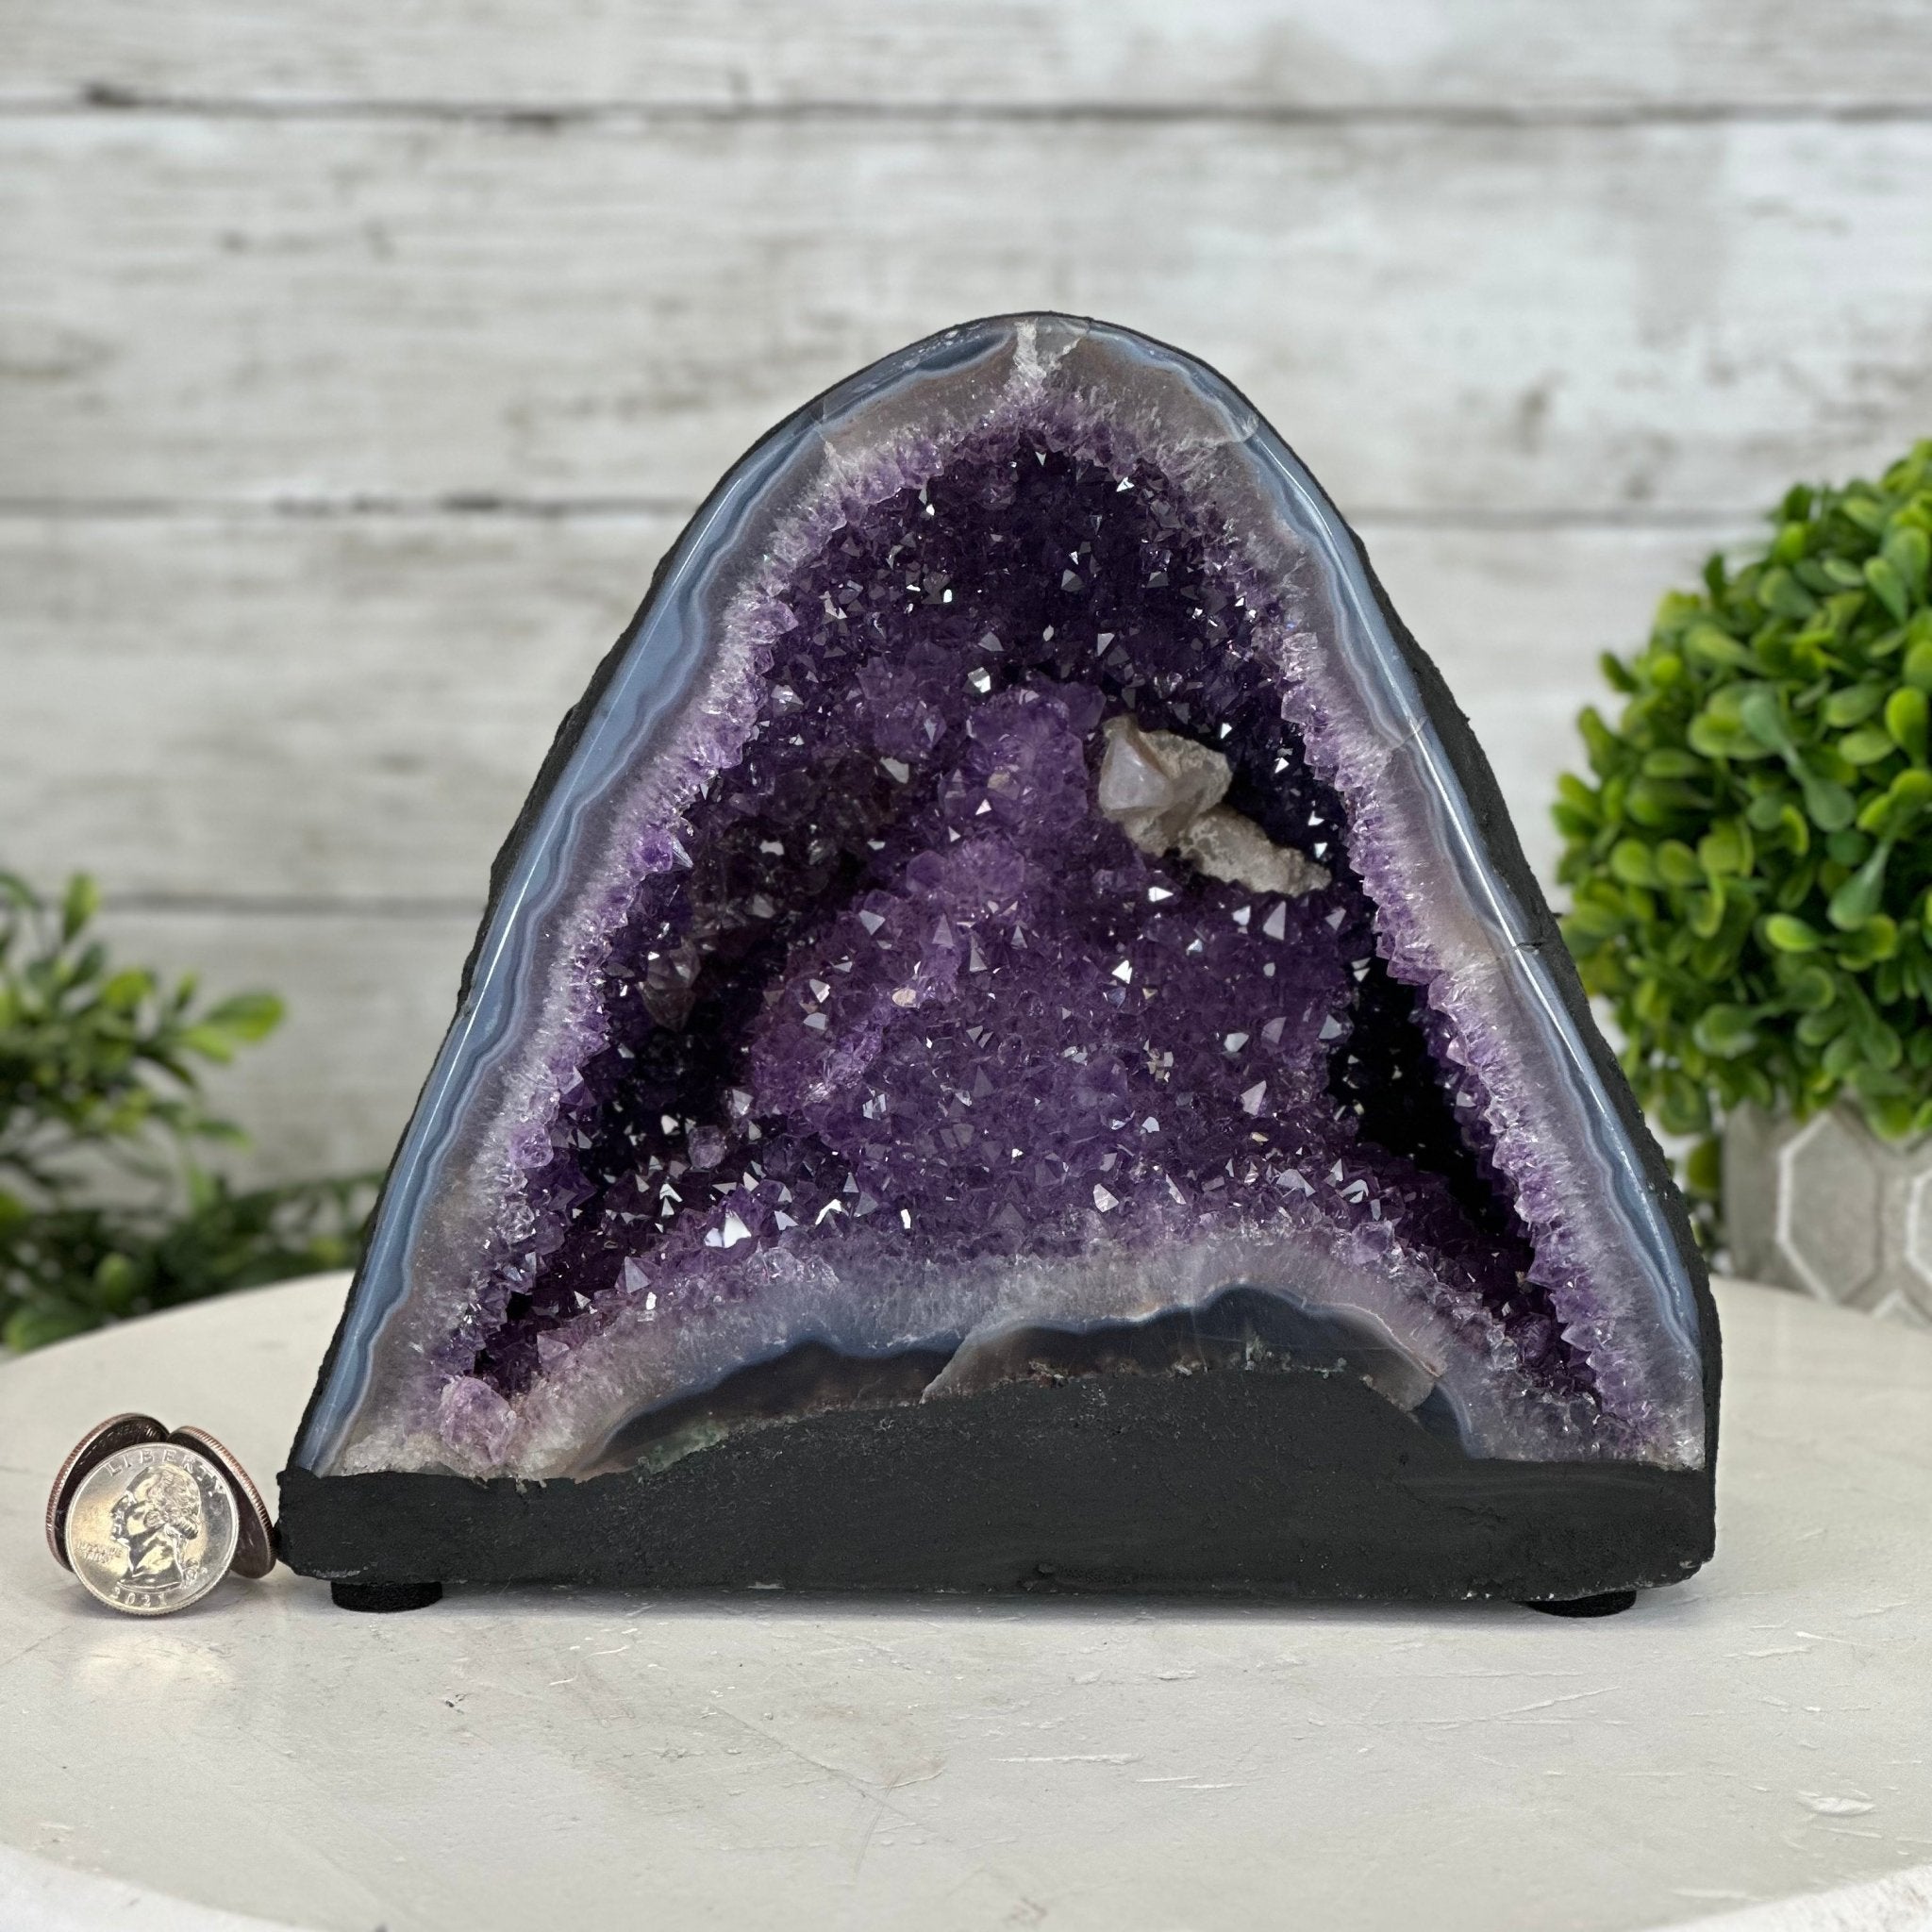 Extra Plus Quality Brazilian Amethyst Cathedral, 10 lbs & 5" Tall, Model #5601-1055 by Brazil Gems - Brazil GemsBrazil GemsExtra Plus Quality Brazilian Amethyst Cathedral, 10 lbs & 5" Tall, Model #5601-1055 by Brazil GemsCathedrals5601-1055